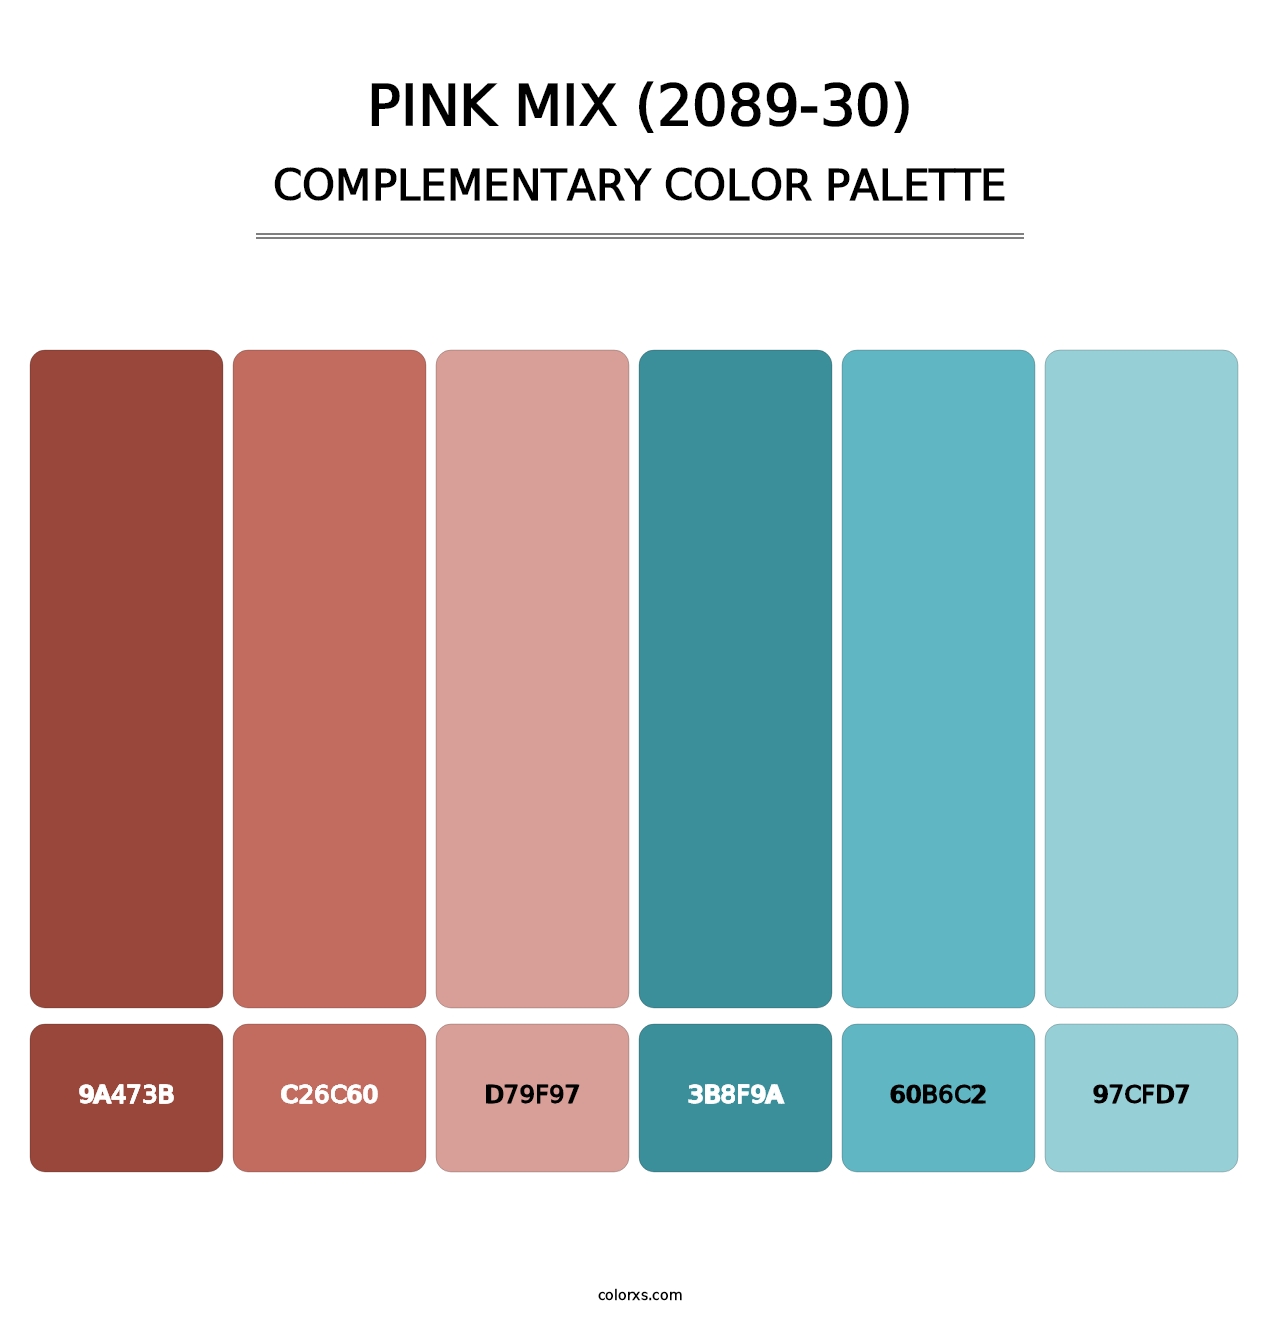 Pink Mix (2089-30) - Complementary Color Palette